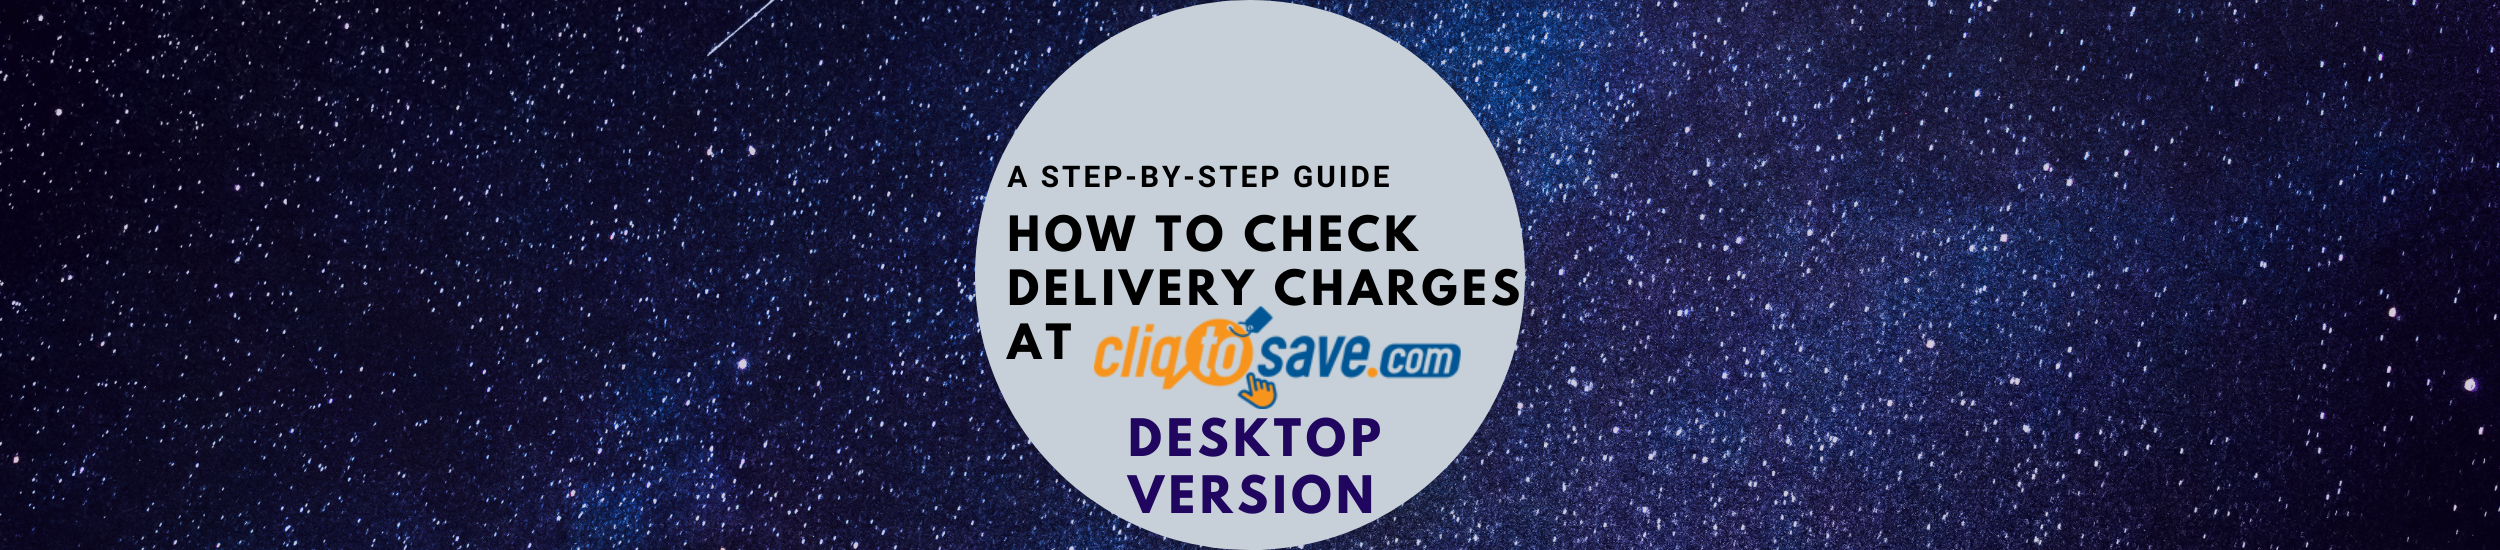 How to Check Delivery Charges (Desktop Version)